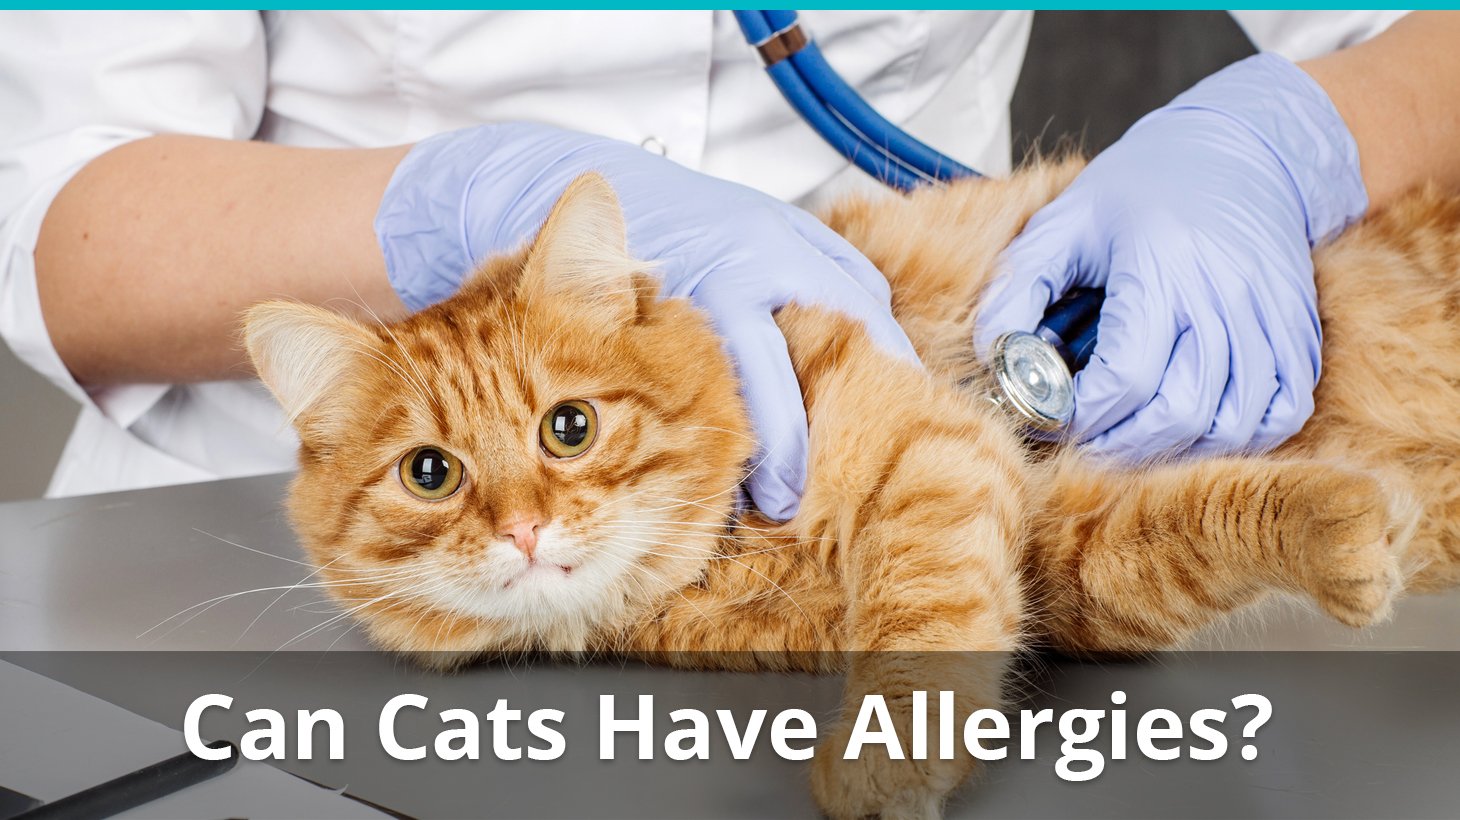 Can Cats Have Allergies Like Humans Can?